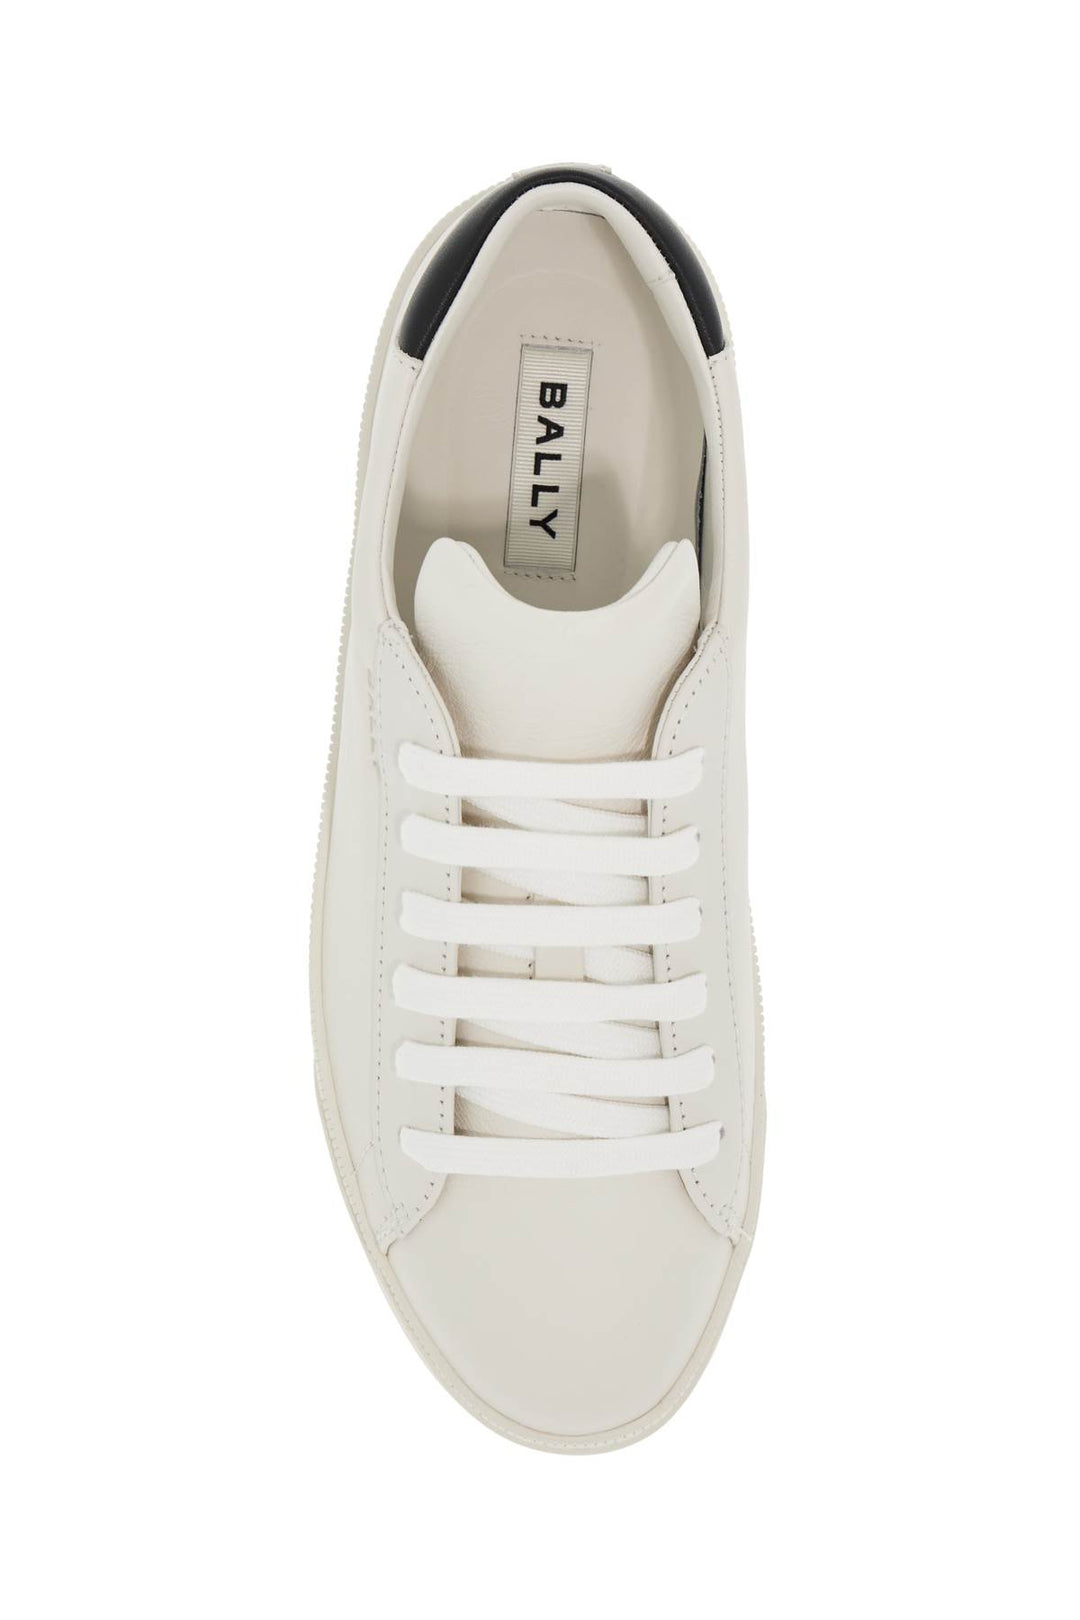 Bally Soft Leather Ryvery Sneakers For Comfortable   White